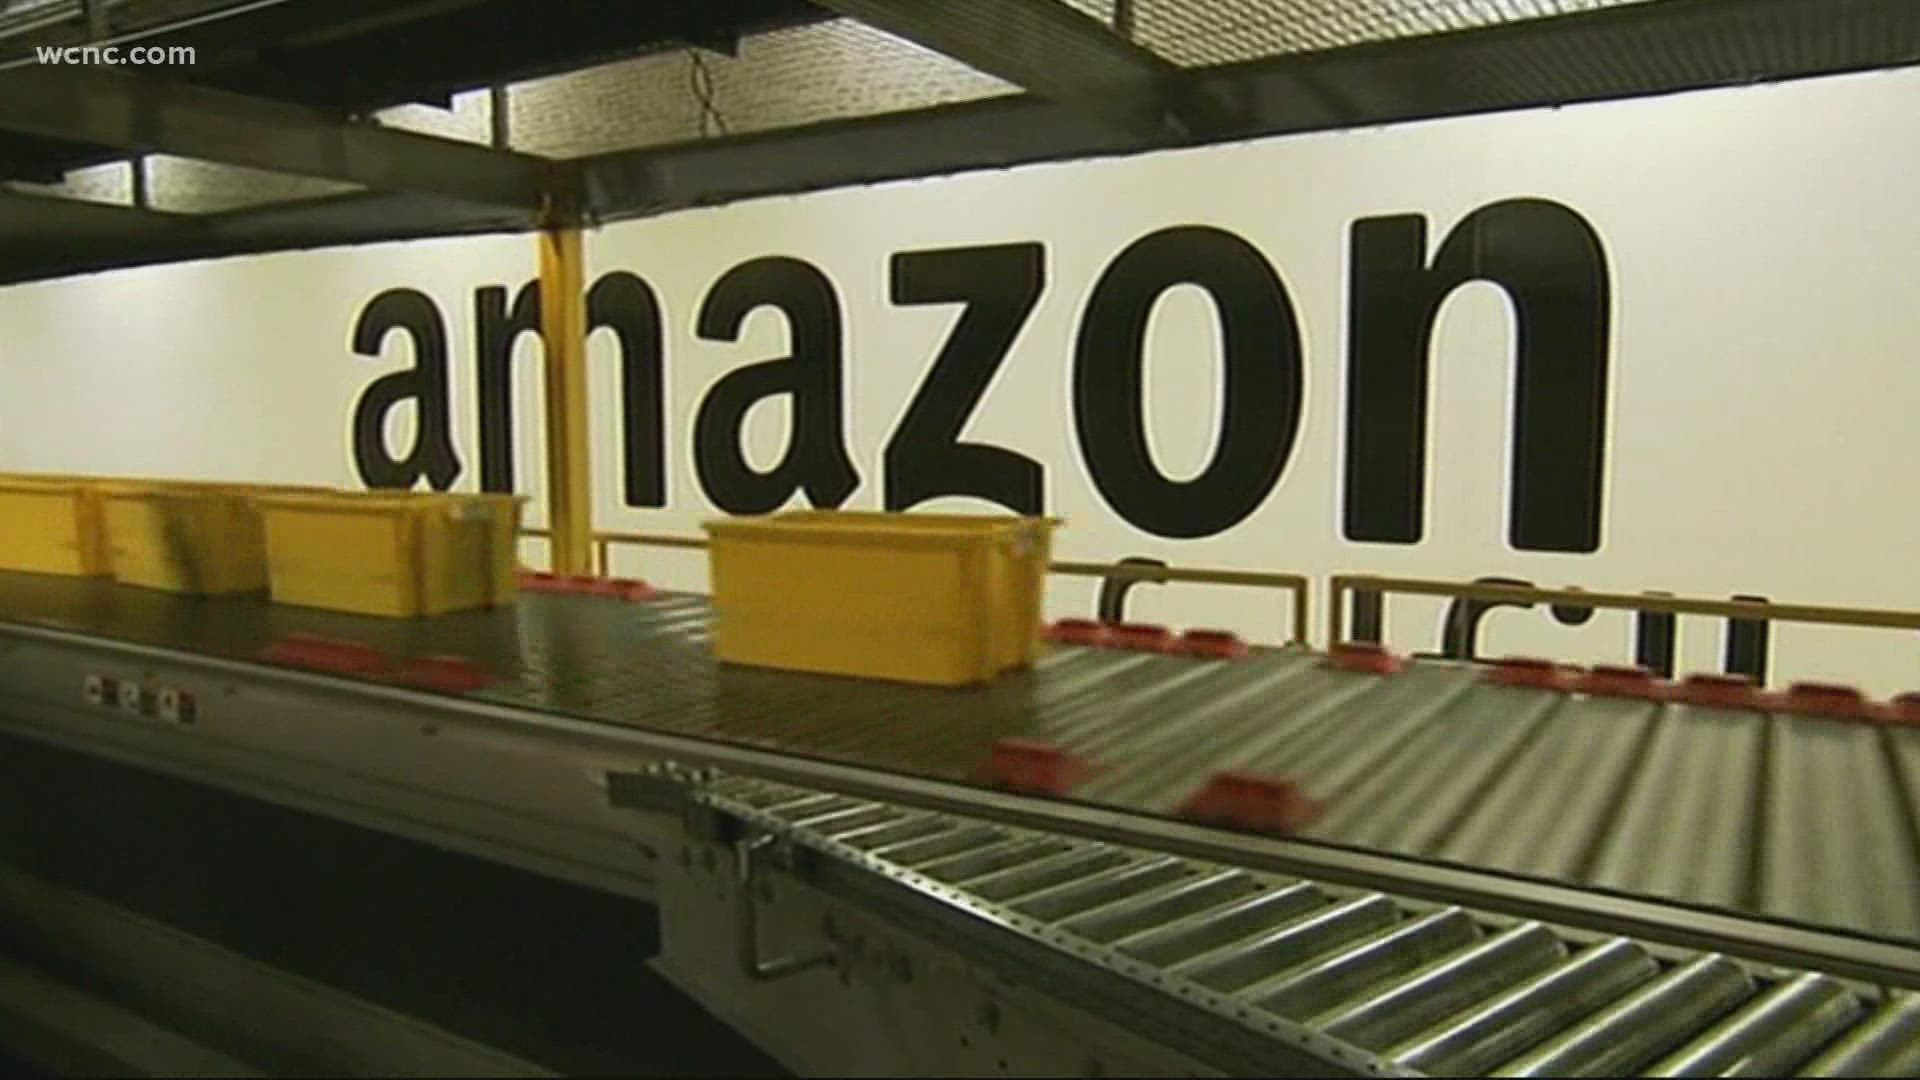 Bill McGinty shows you how to buy local products on Amazon.